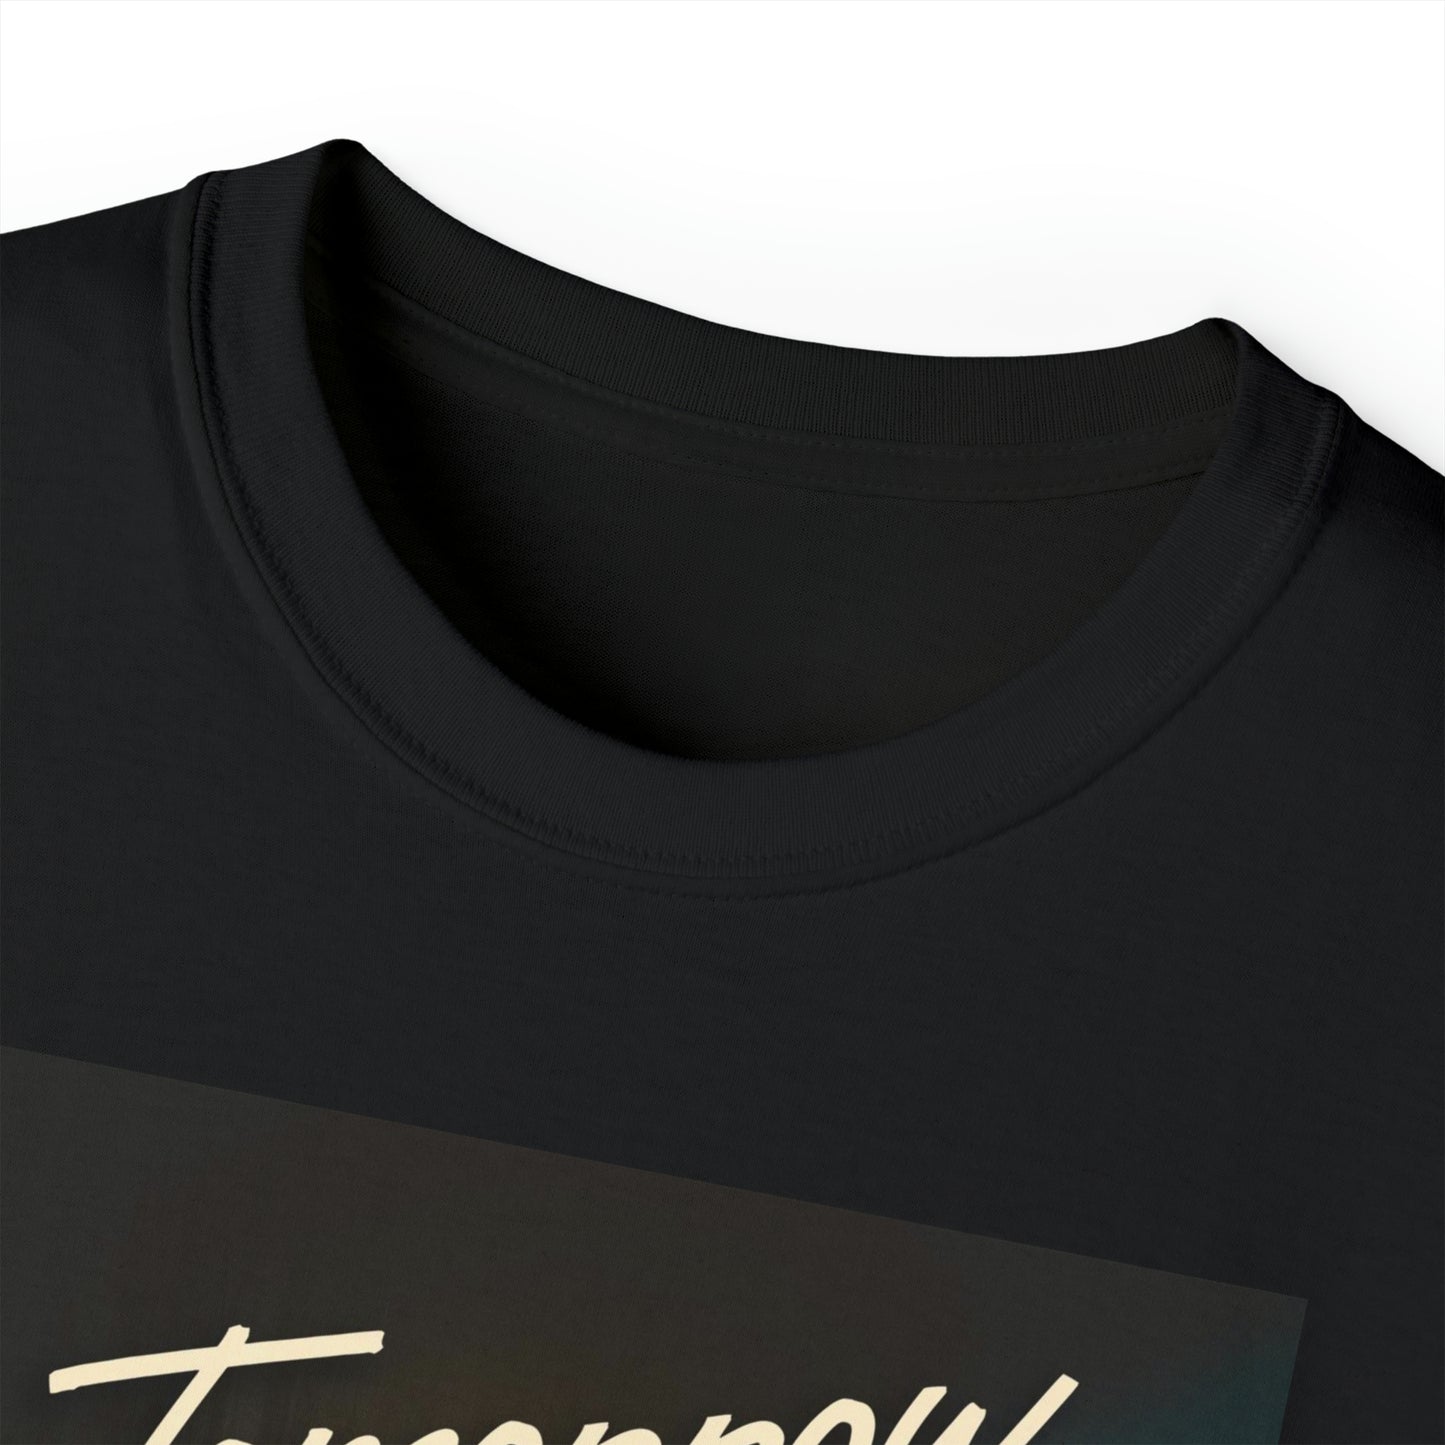 Tomorrow Is The Last Day - Unisex T-Shirt